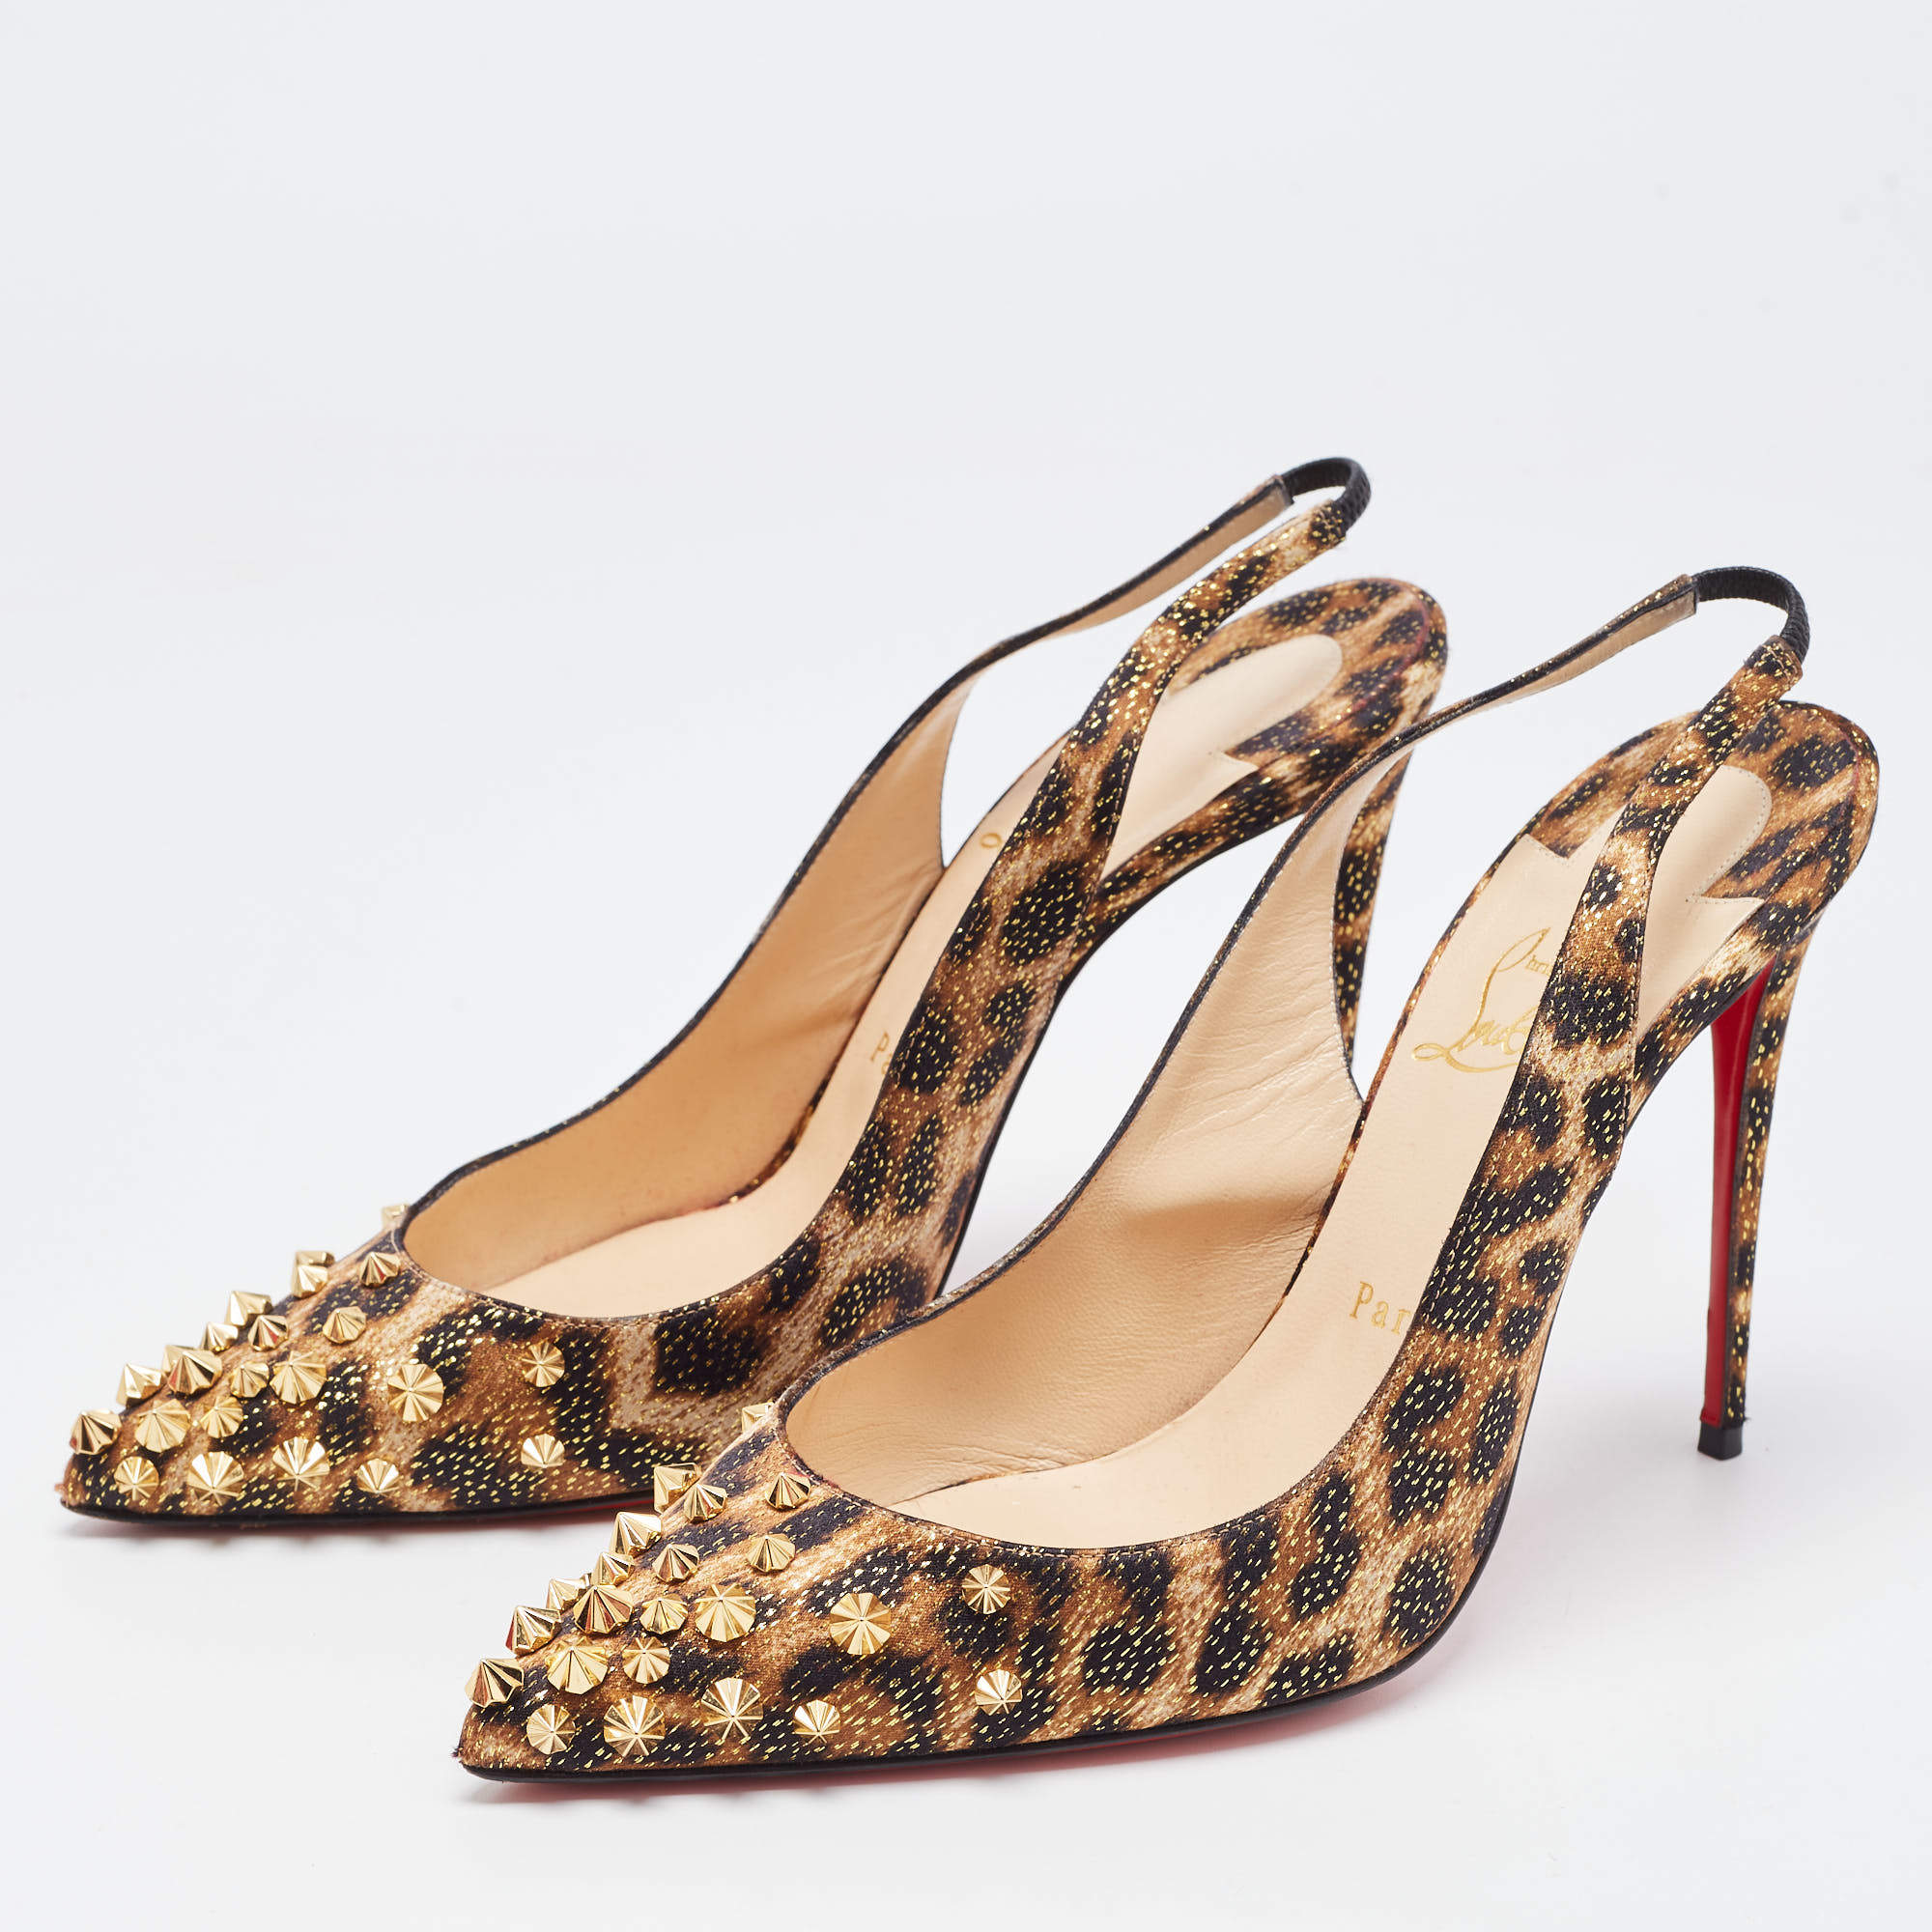 Christian Louboutin Tricolor Leopard Print Satin Spiked Drama 